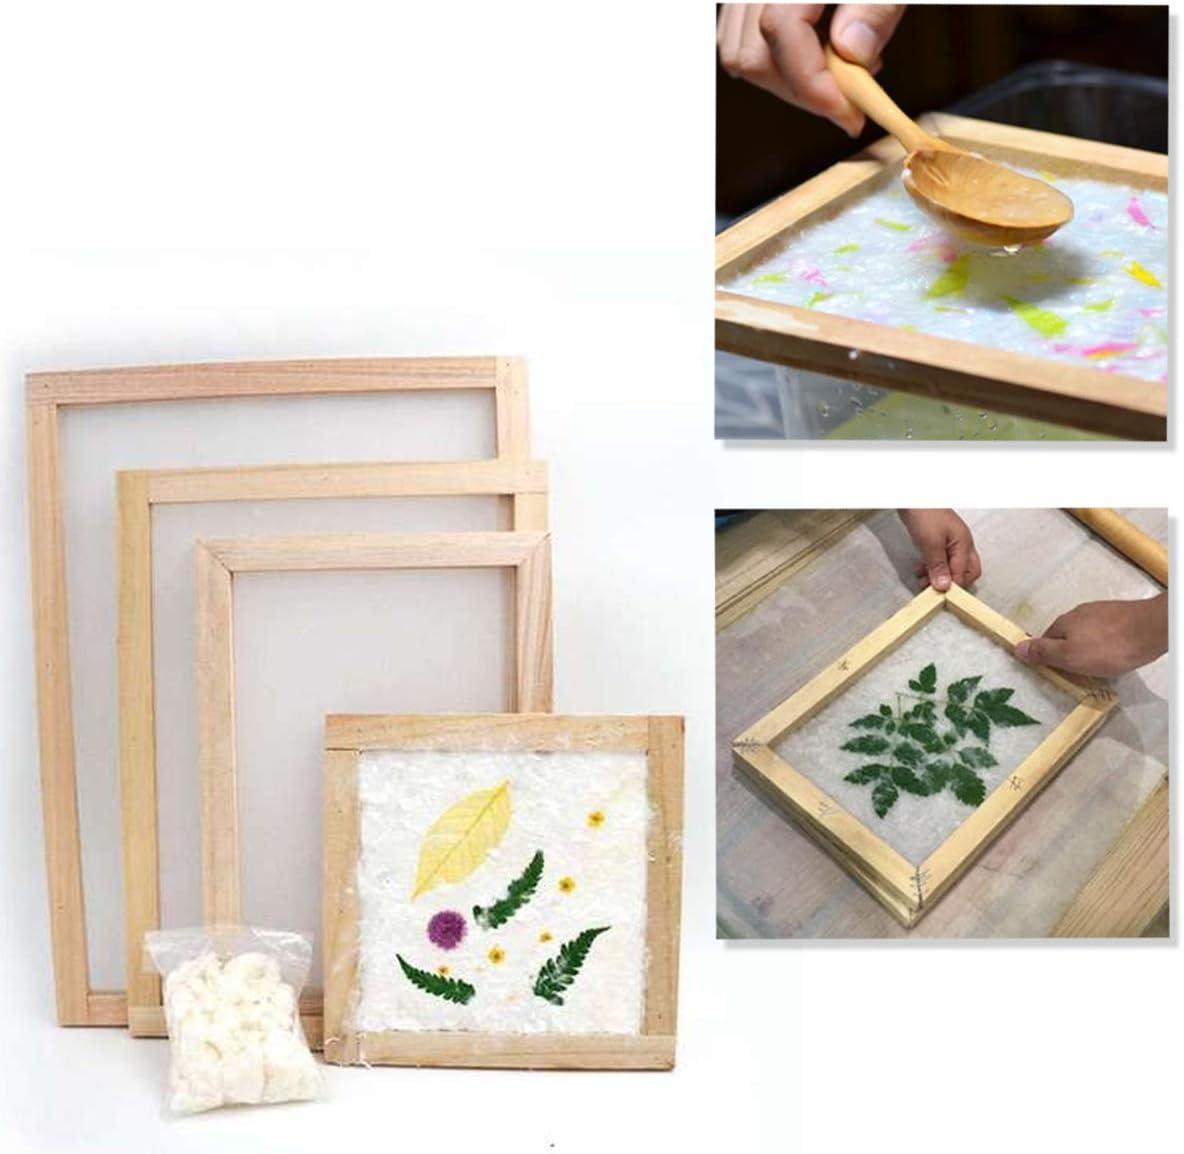 Worown A6 Size Paper Making Screen, Natural Wooden Papermaking Mould, 5 x 7 inch Wooden Paper Making Frame for DIY Paper Craft and Dried Flower